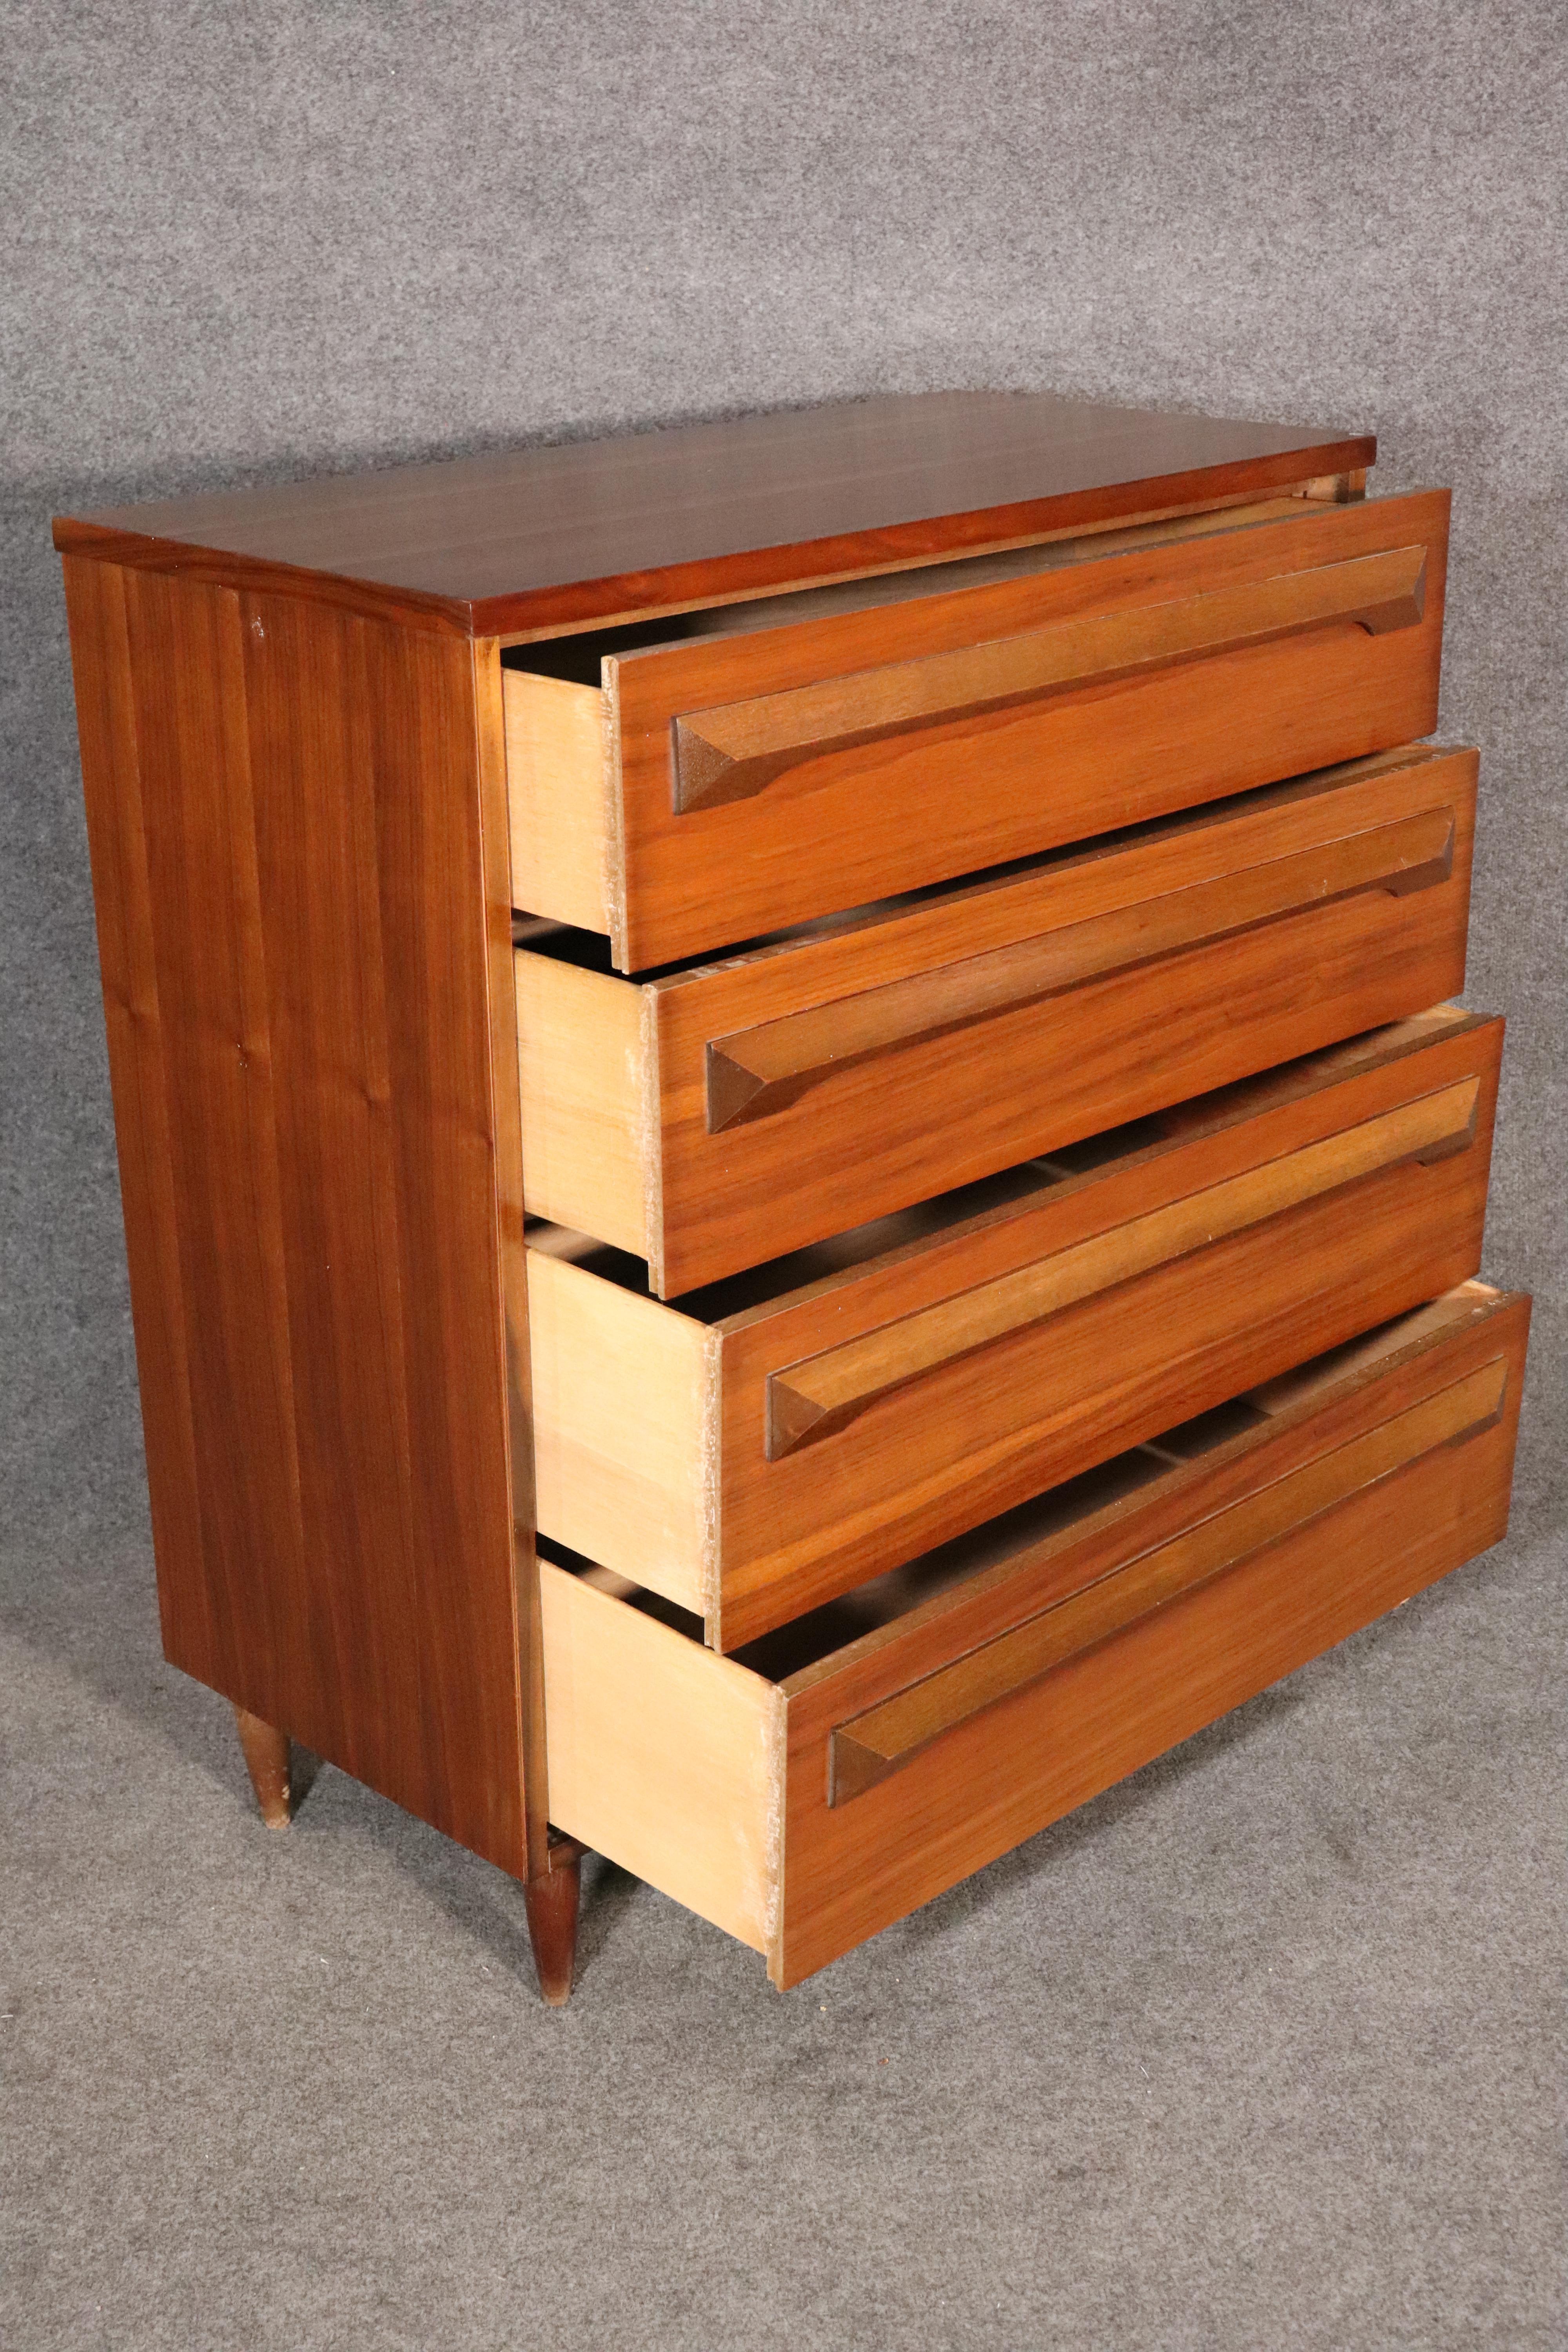 Tall mid-century dresser with sculpted handles. Four wide drawers, all in walnut grain, with short tapered legs.
Please confirm location NY or NJ